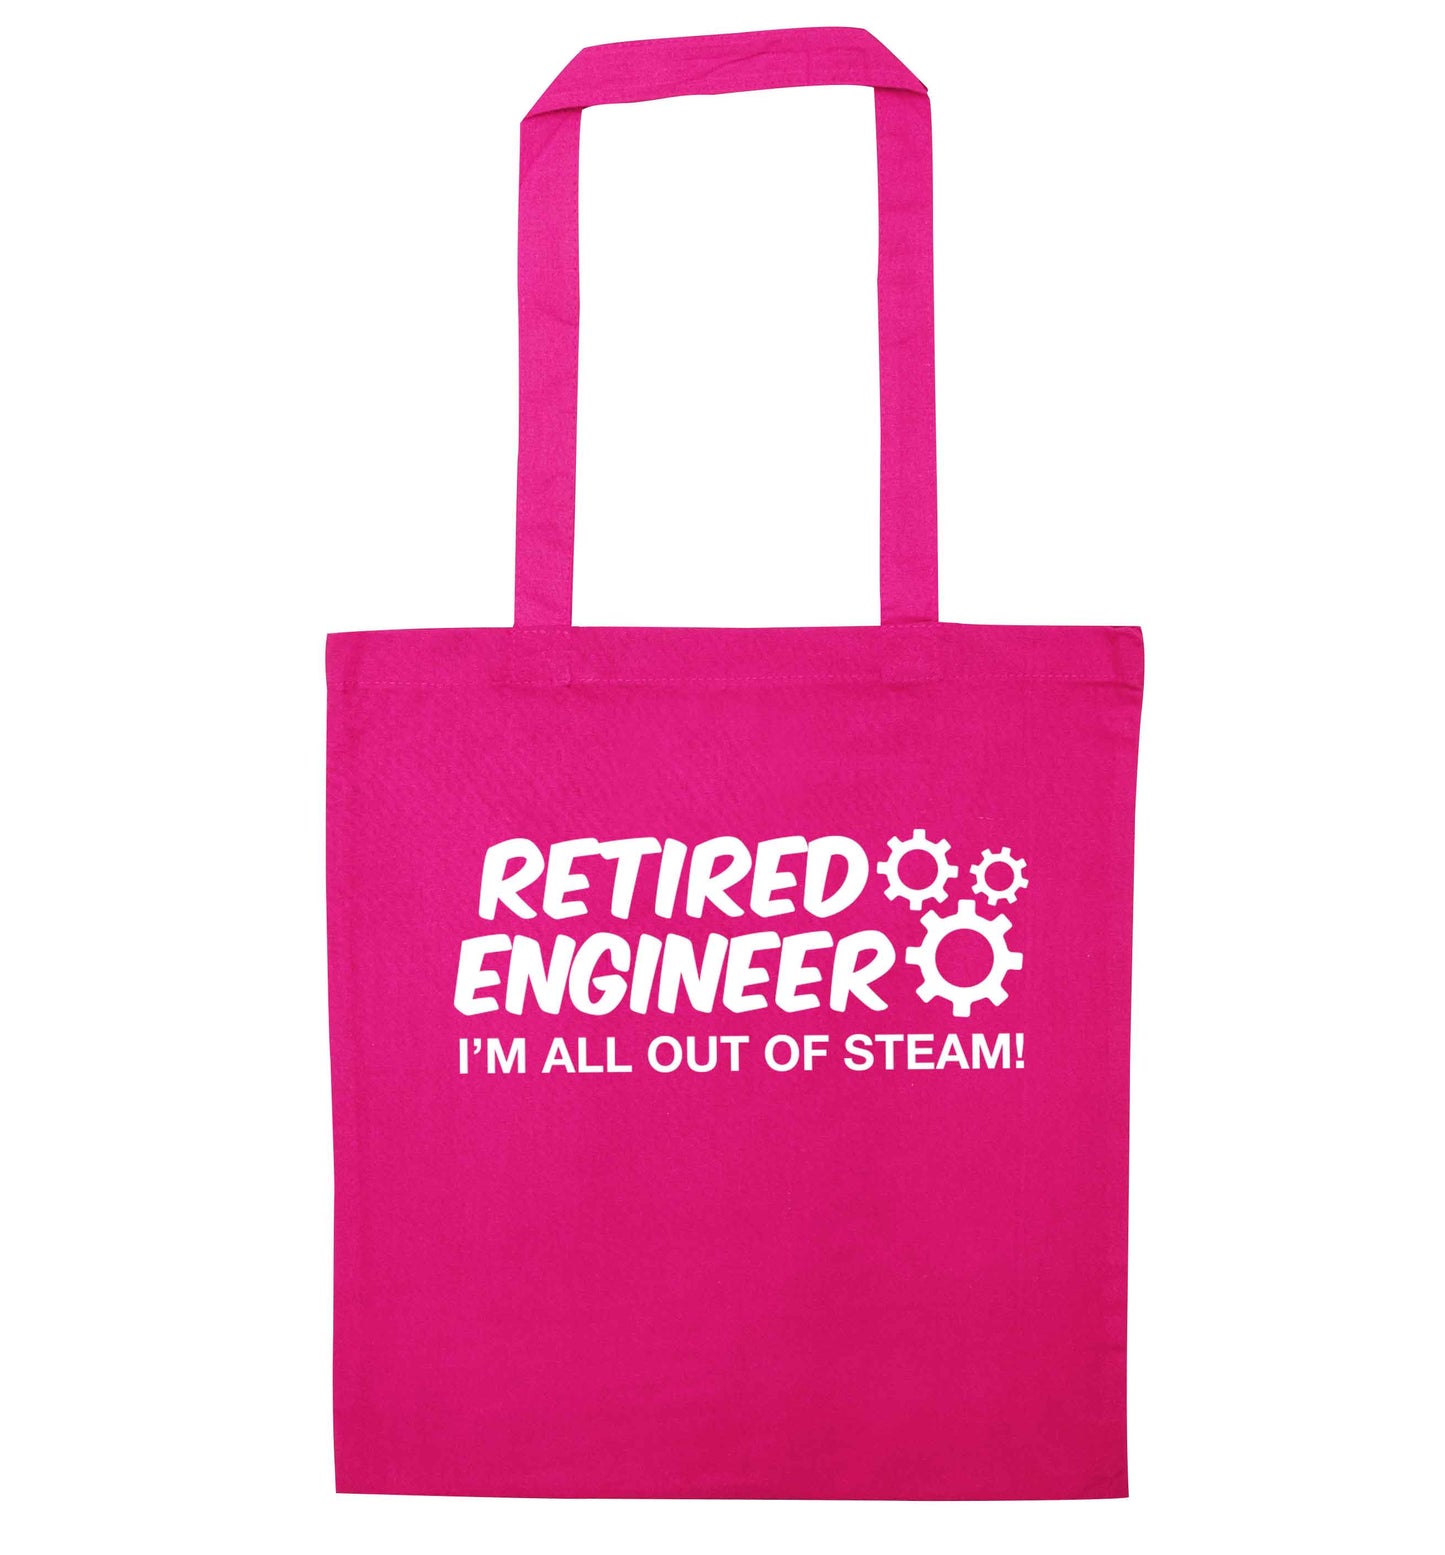 Retired engineer I'm all out of steam pink tote bag